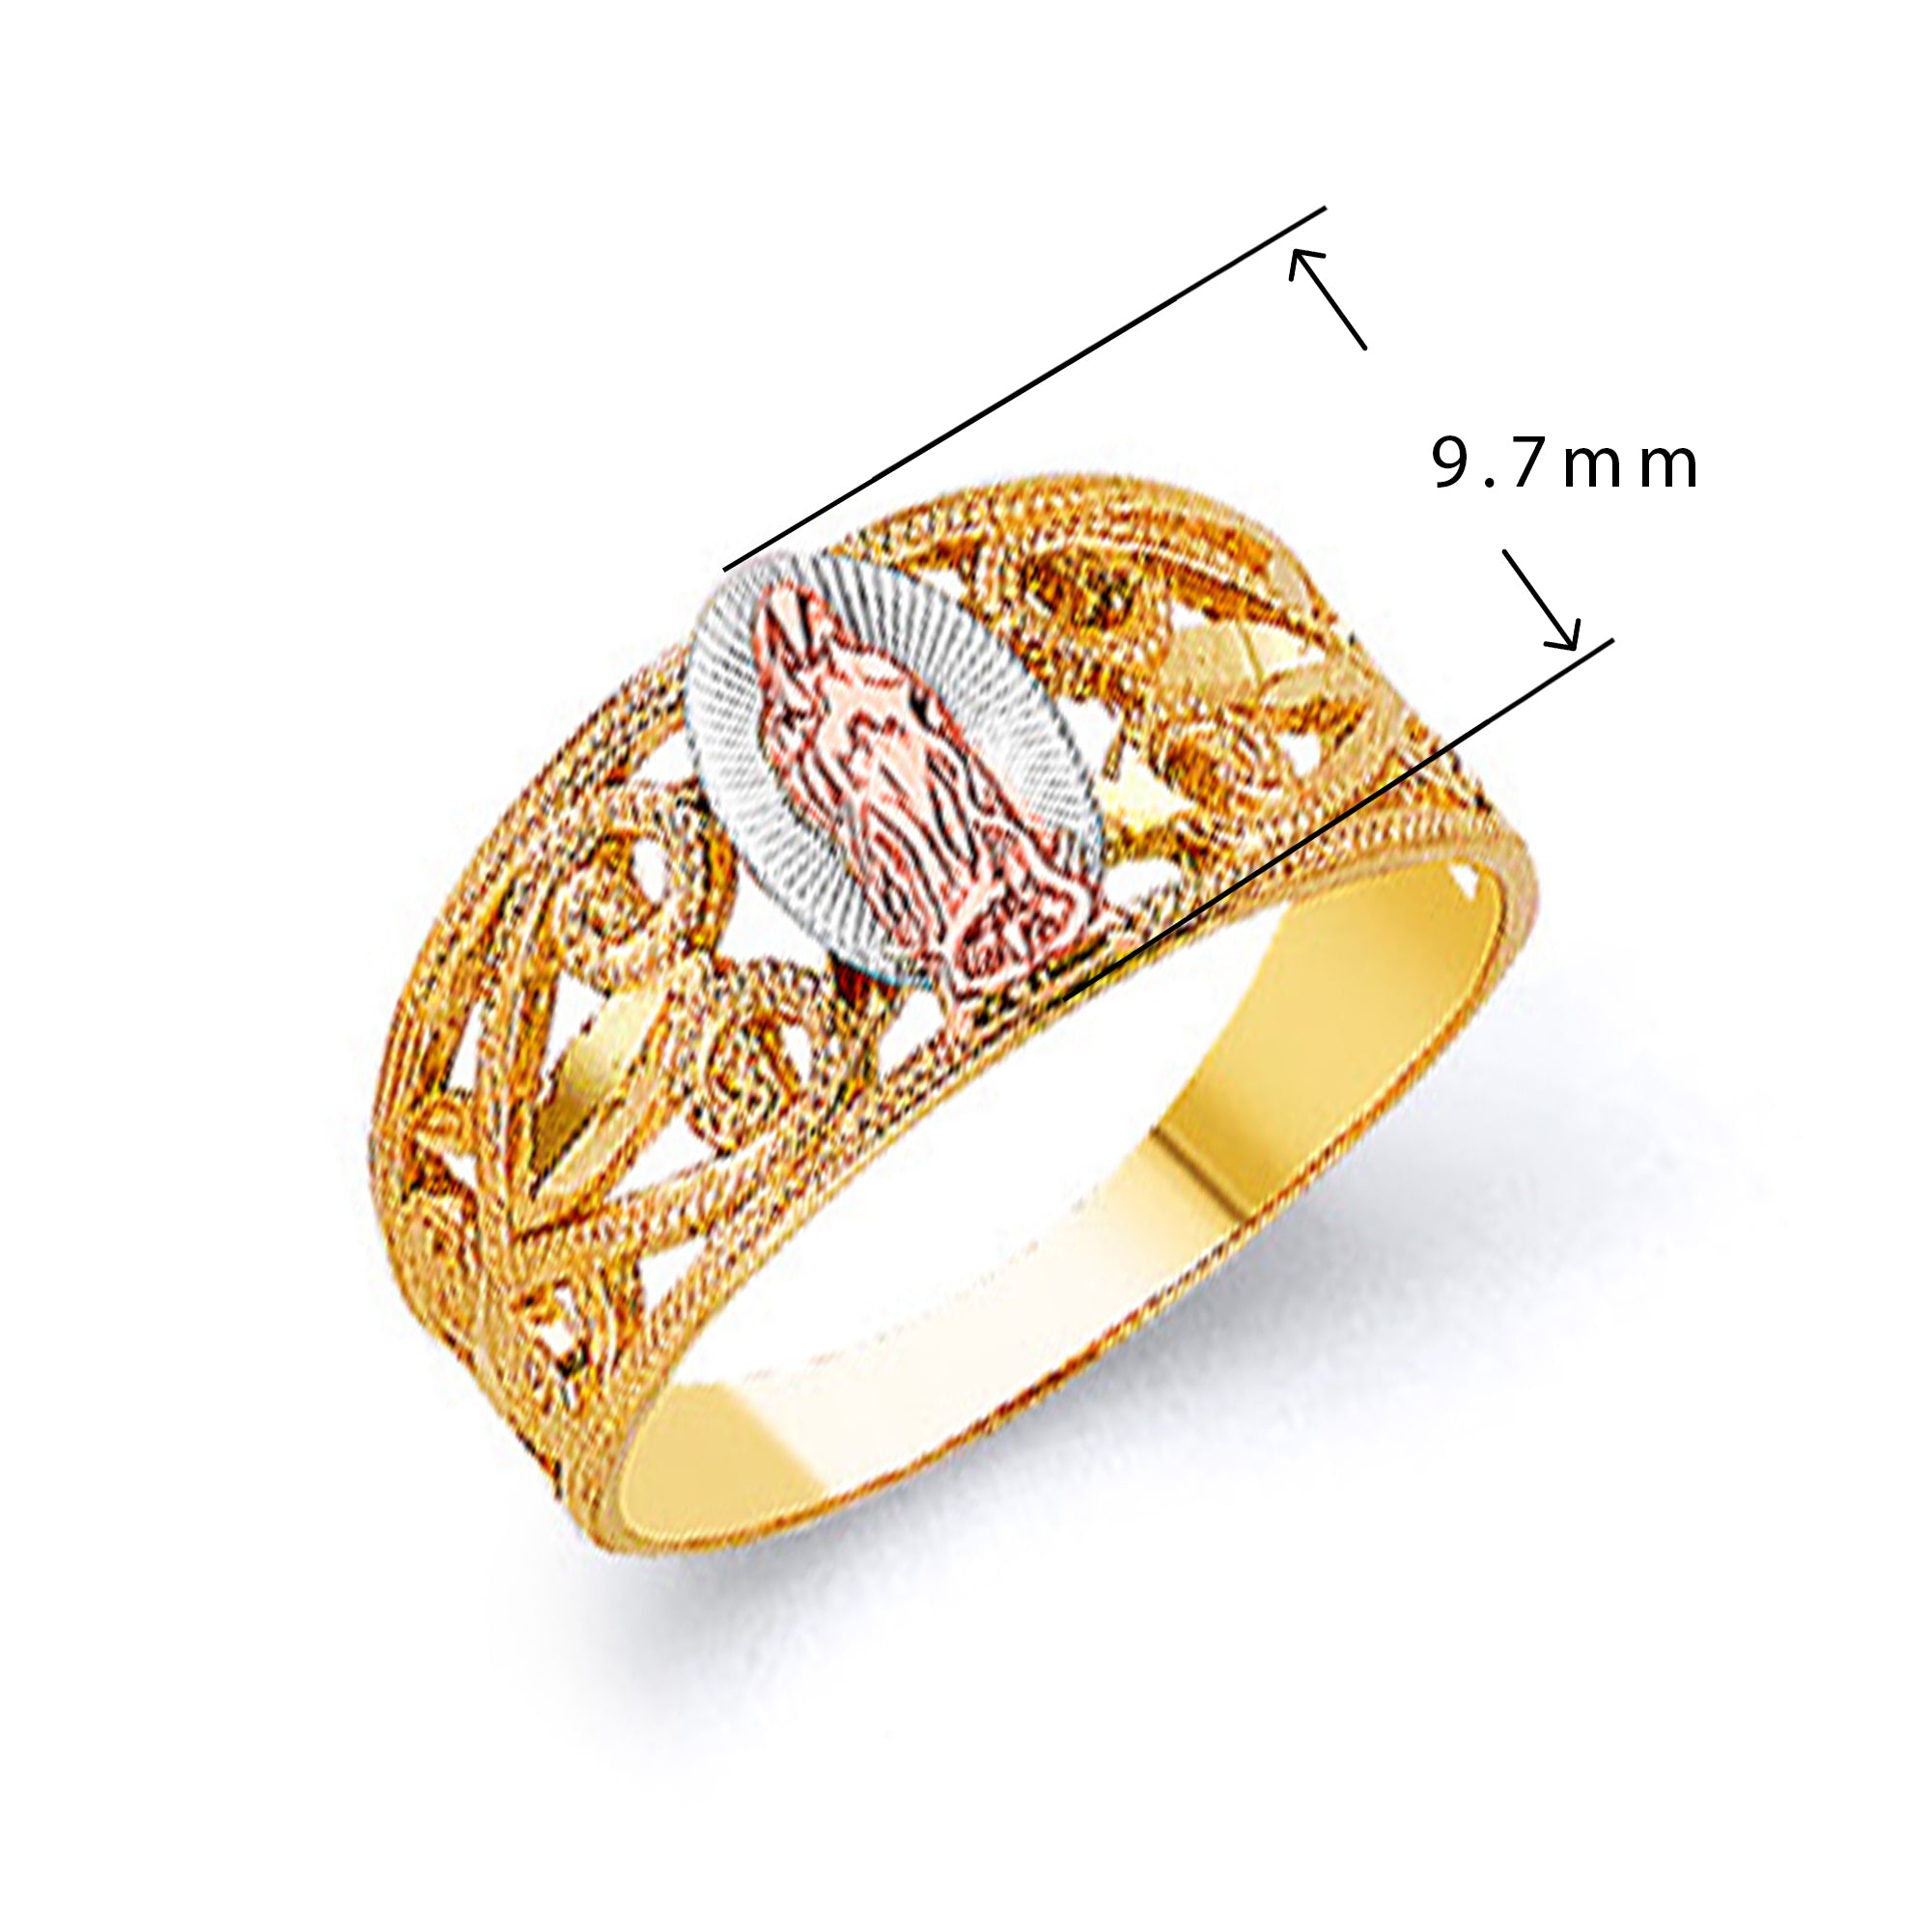 Textured Filigree Religious Ring in Solid Gold with Measurement